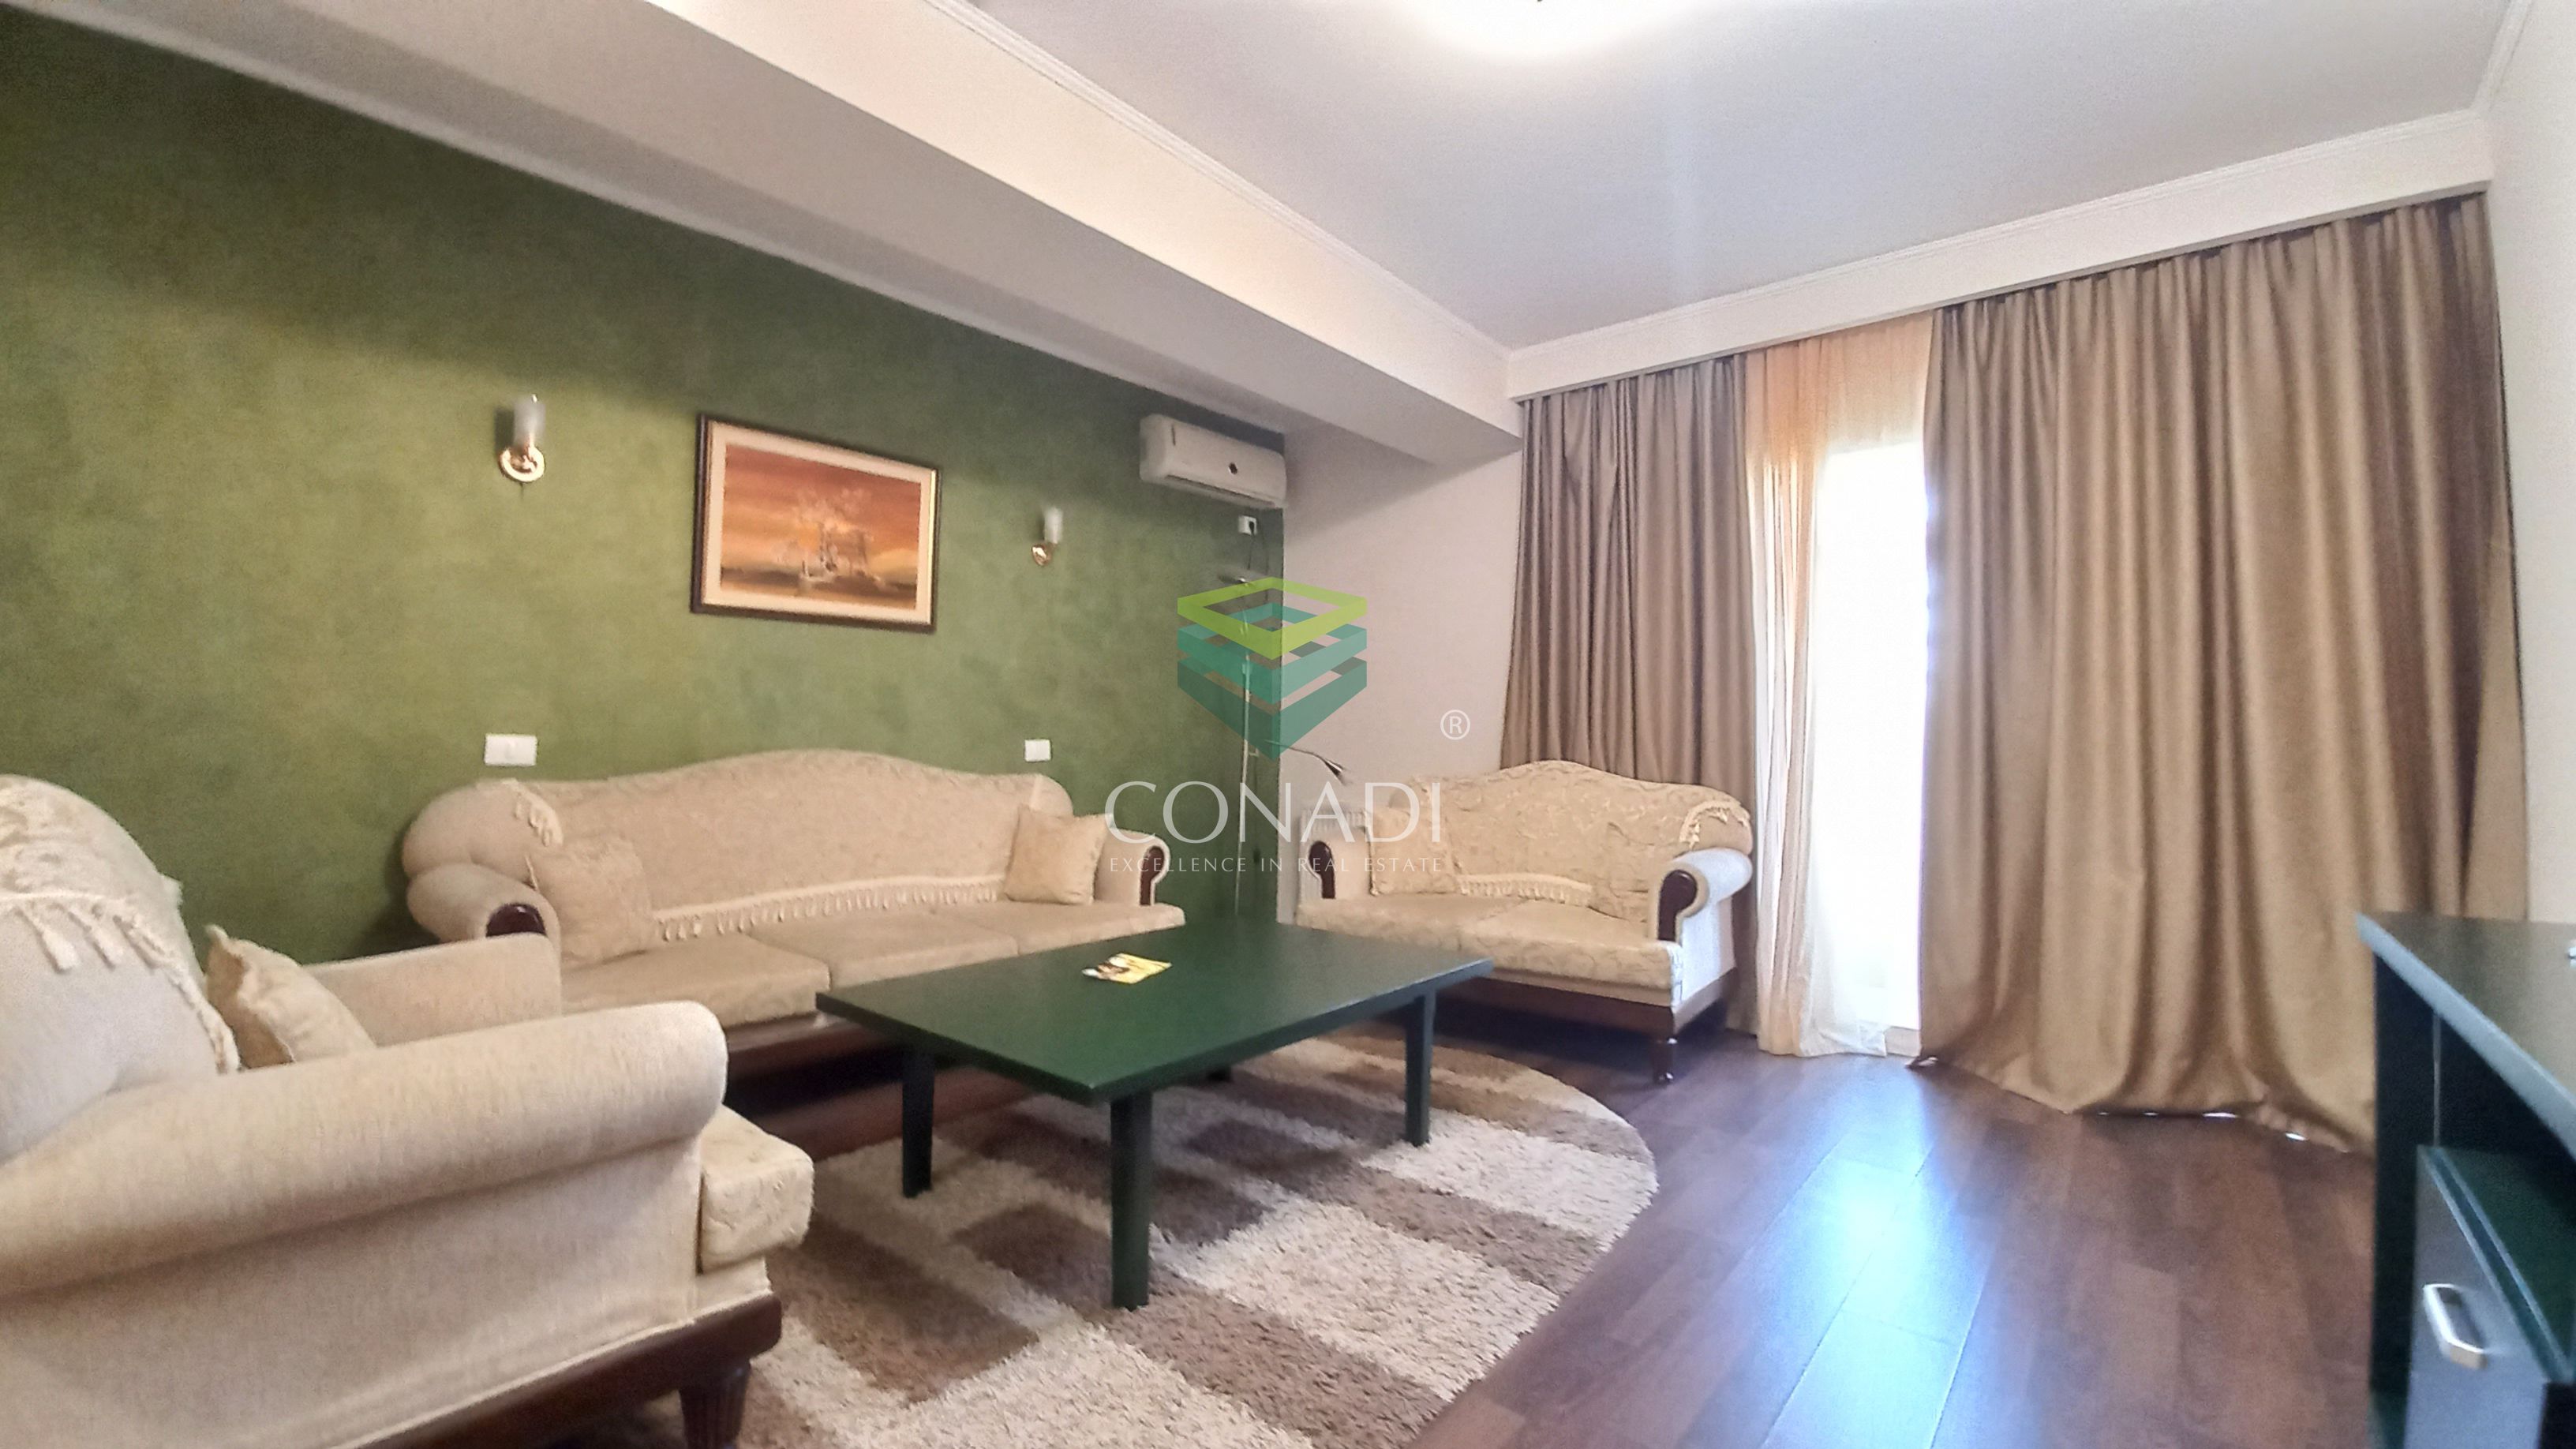 Apartment with 3 rooms // Baneasa // Herastrau